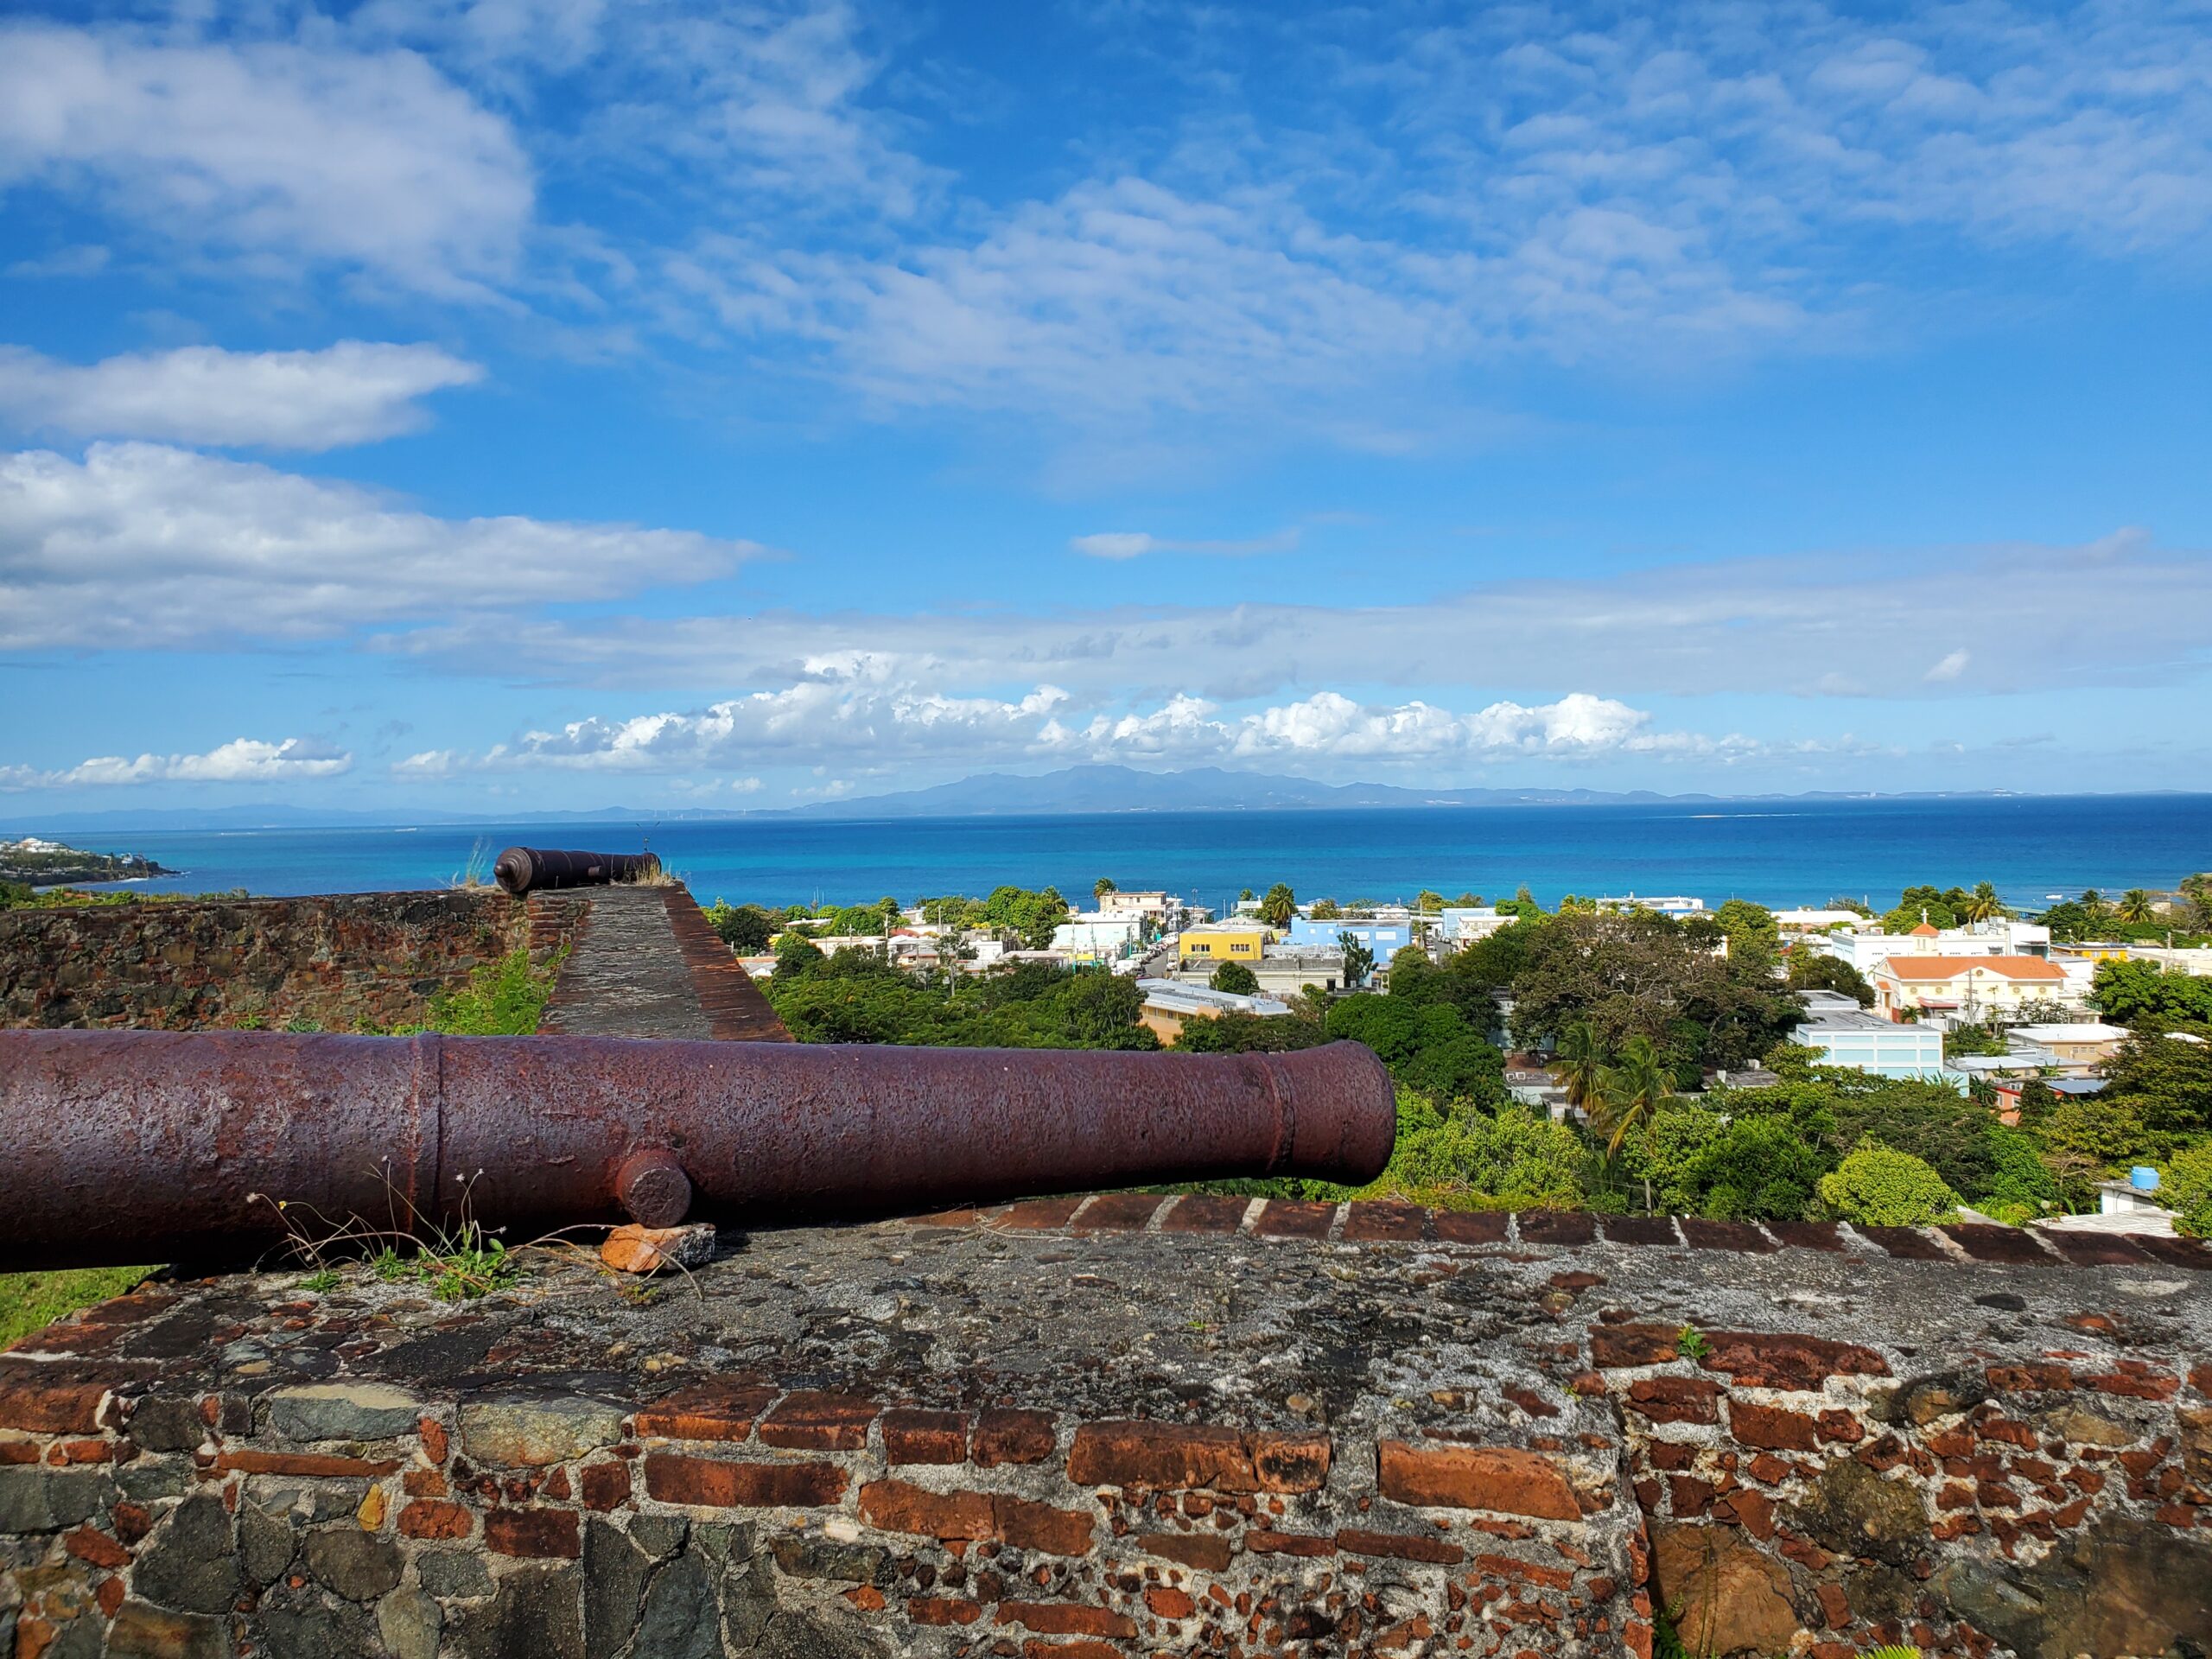 View of canon overlooking the town of Isabel Segunda